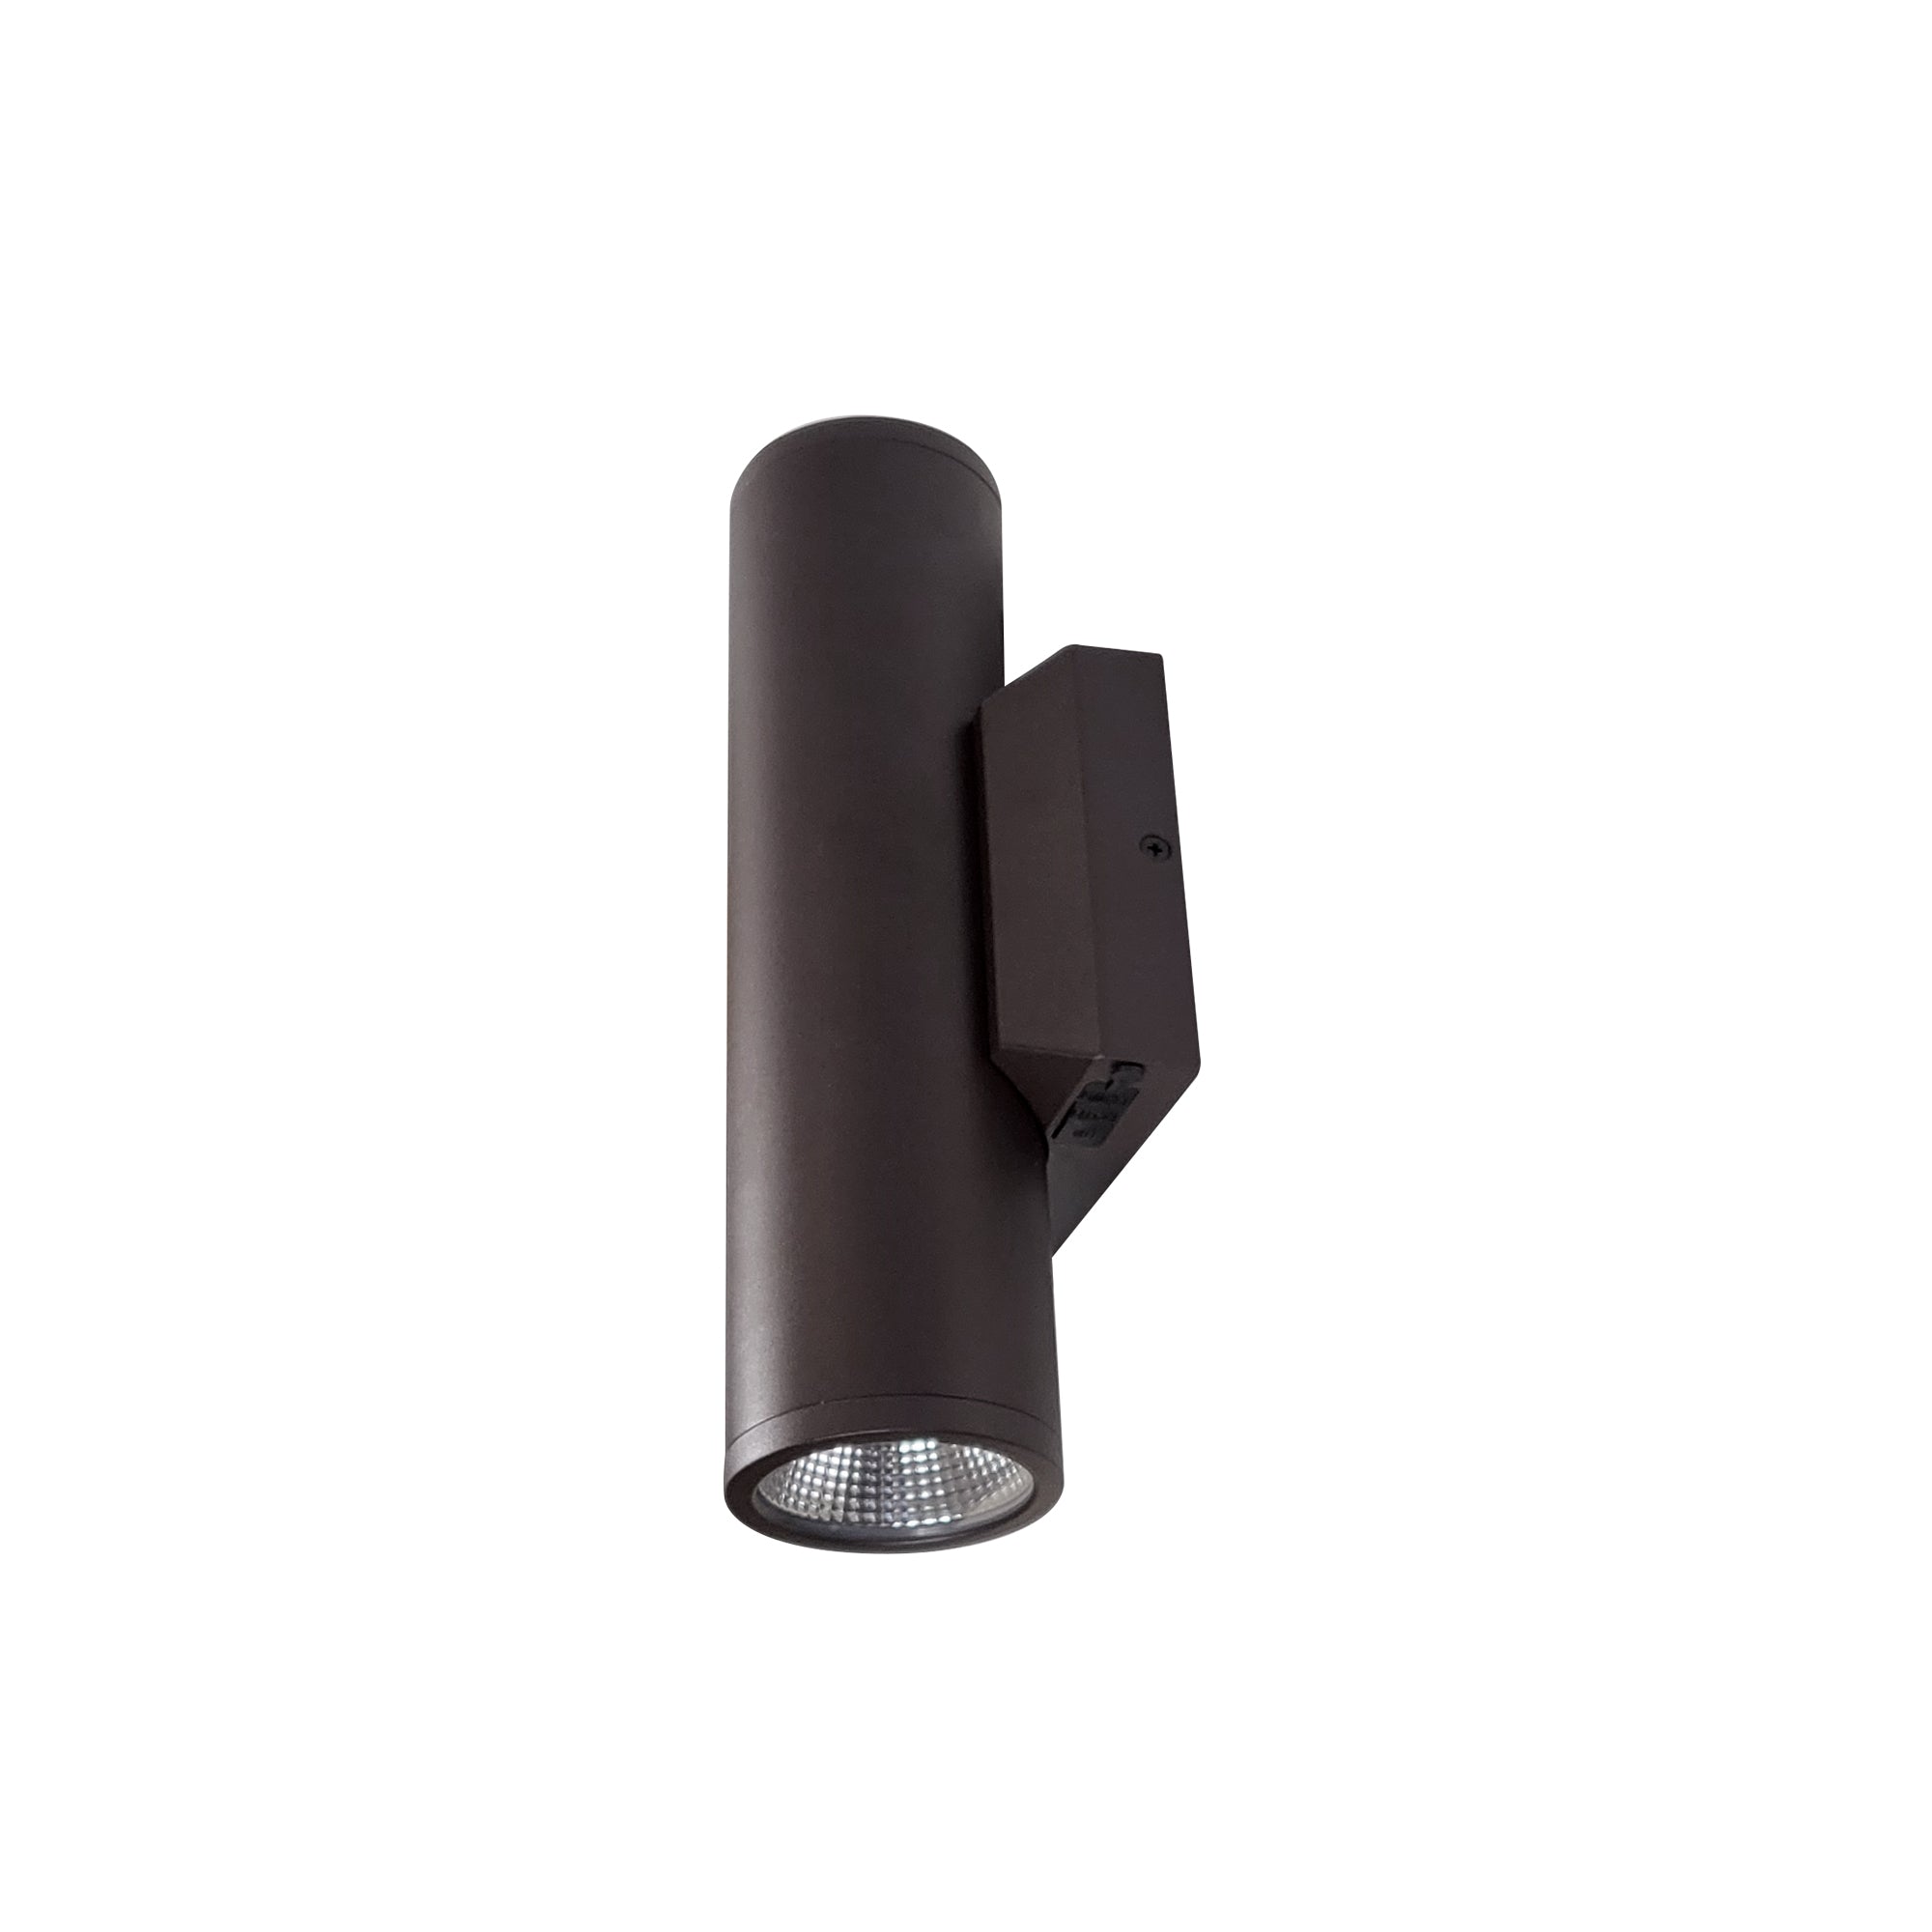 Nora Lighting NYUD-3L1345BZ - Cylinder - 3 Inch Up & Down Wall Mounted LED Cylinder with Selectable CCT, Bronze finish